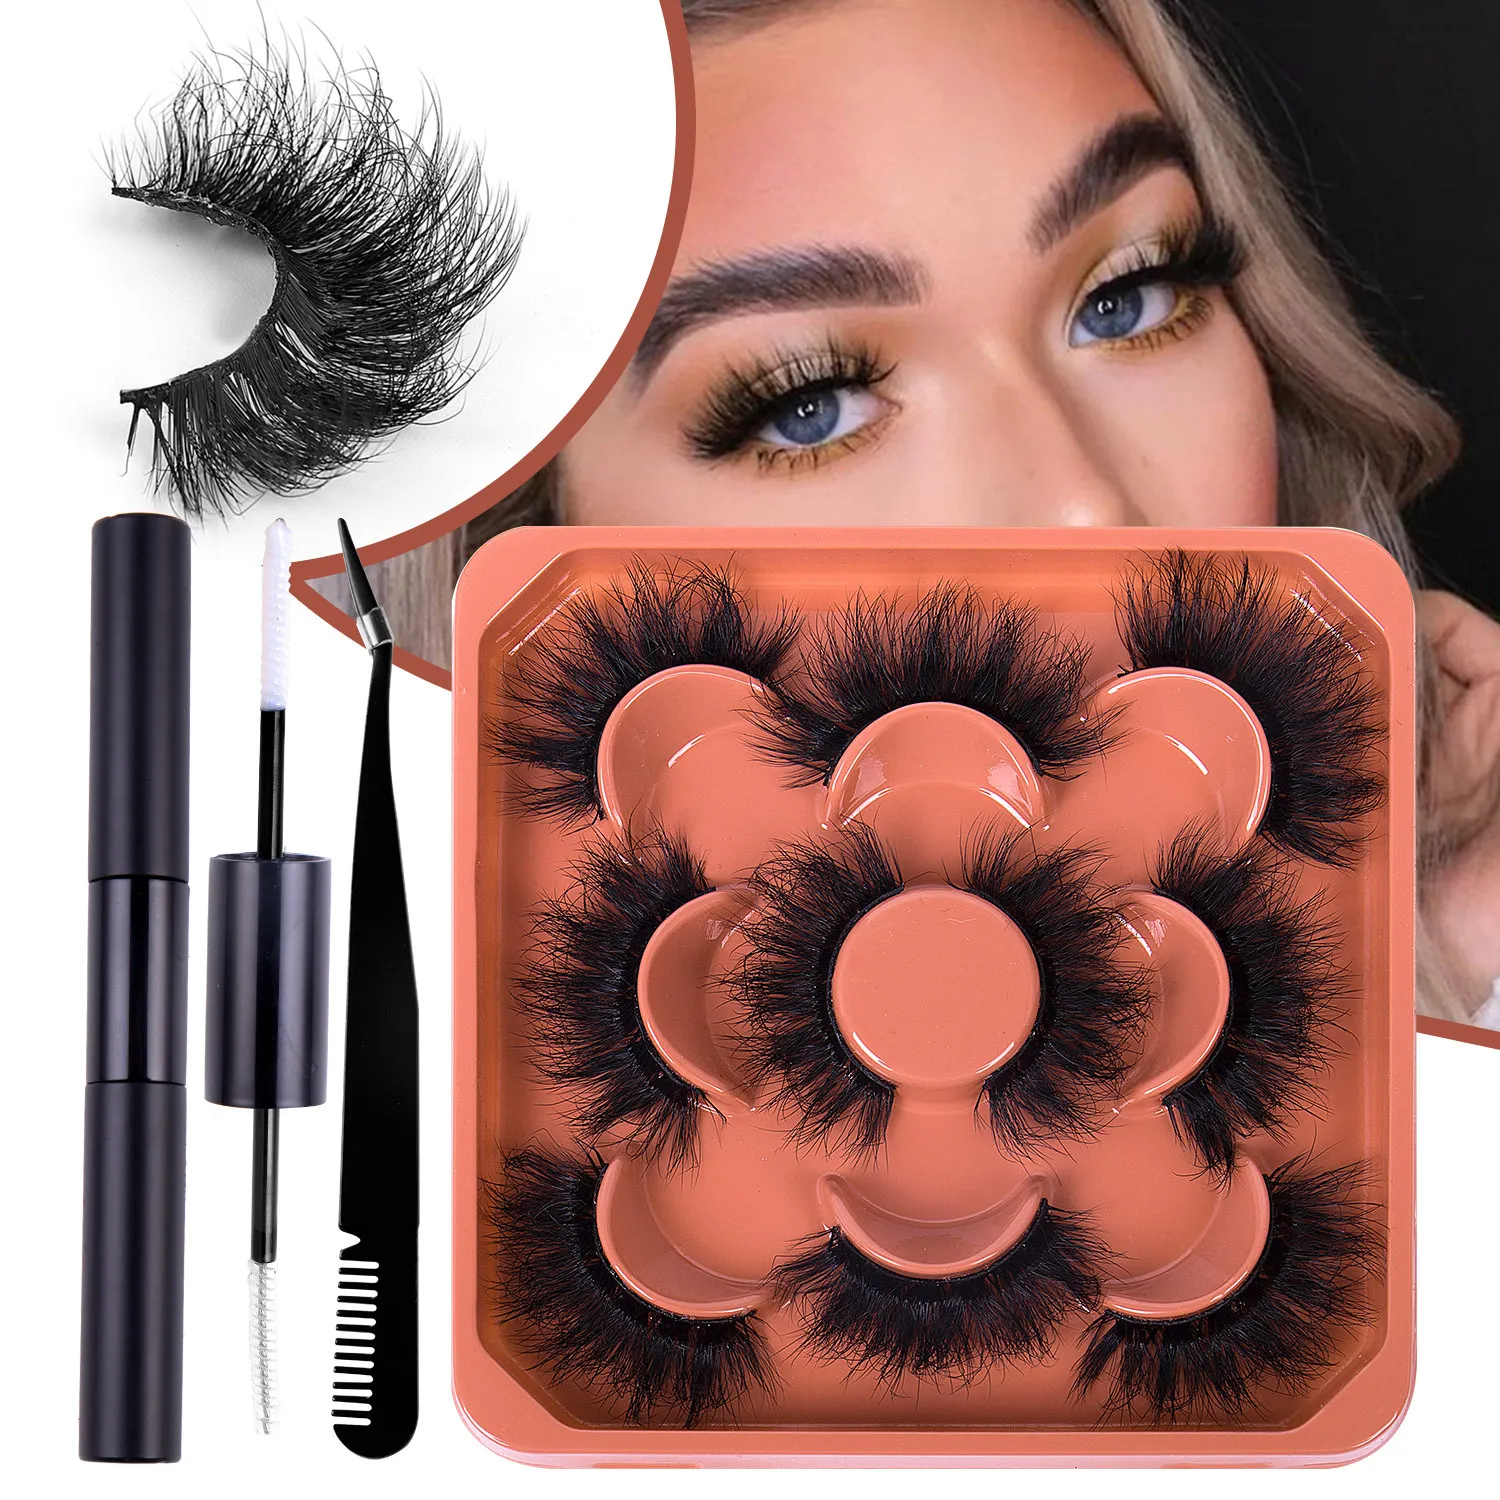 Multilayer Thick Fluffy Mink Fake Eyelashes Extensions Naturally Soft Delicate Handmade Reusable 3D Faux Mink Lashes Full Strip Eyelash Extensions